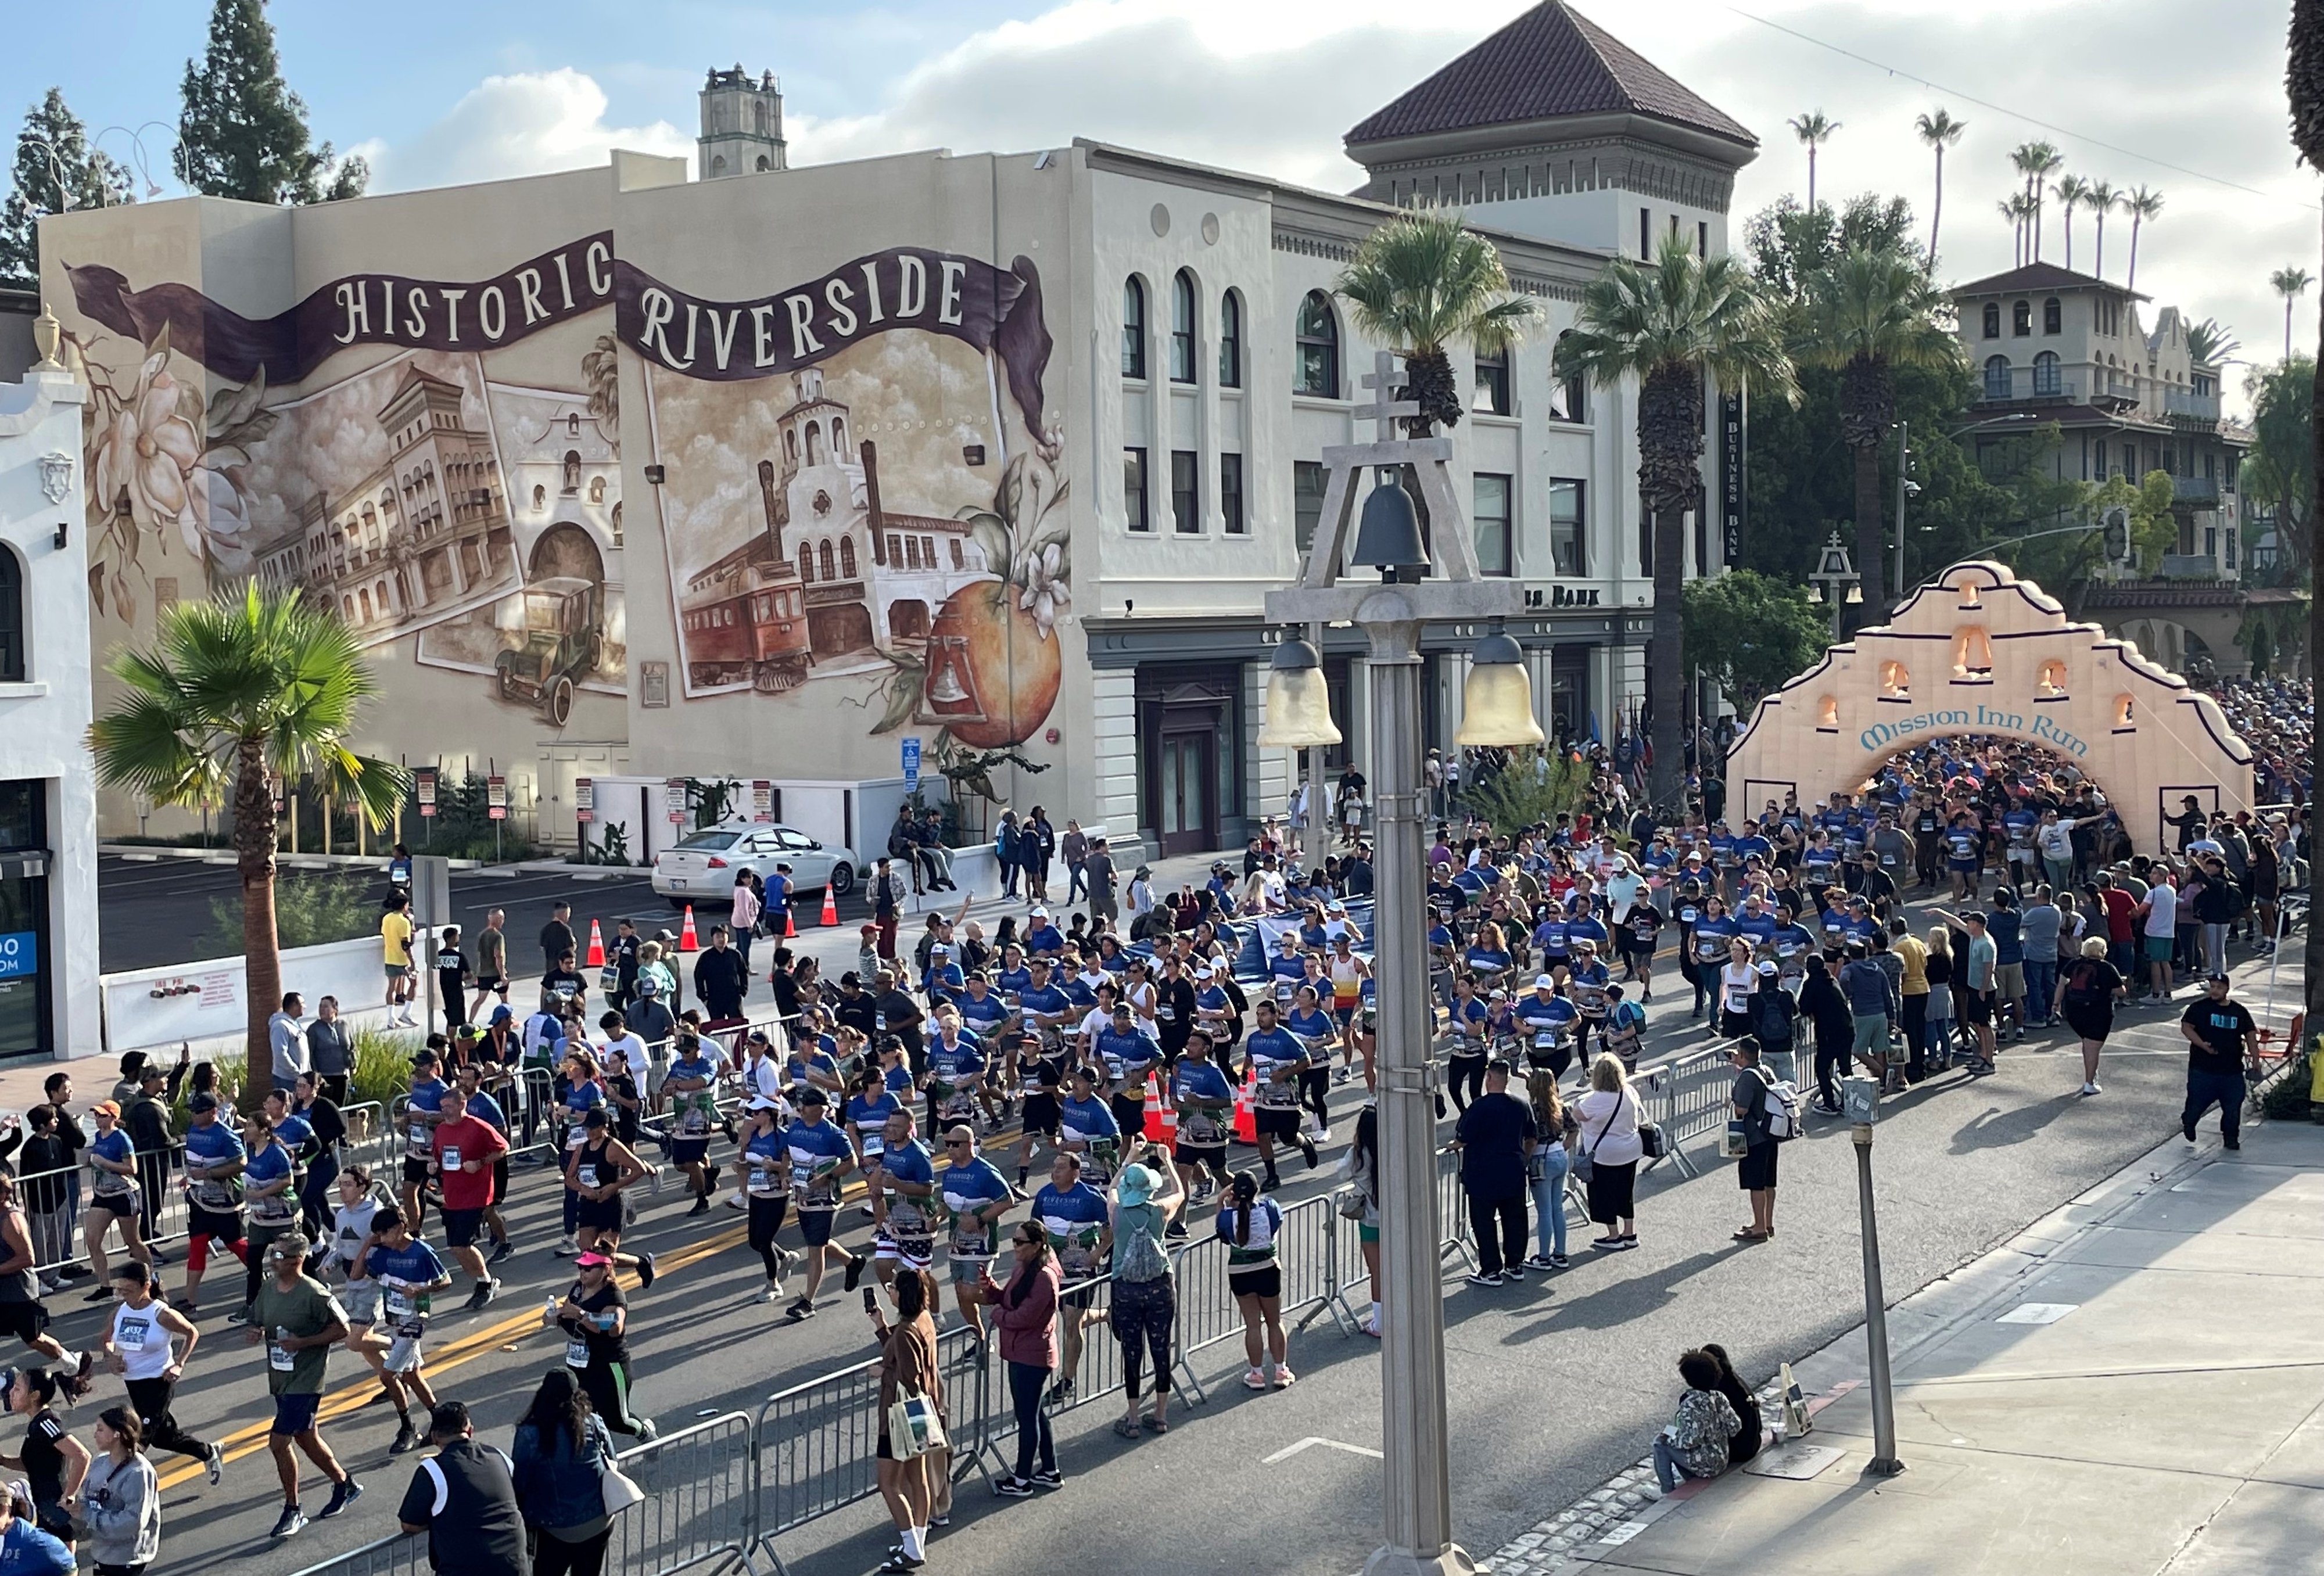 Marching band parades through a city street with onlookers, near buildings with &#x27;Historic Riverside&#x27; mural